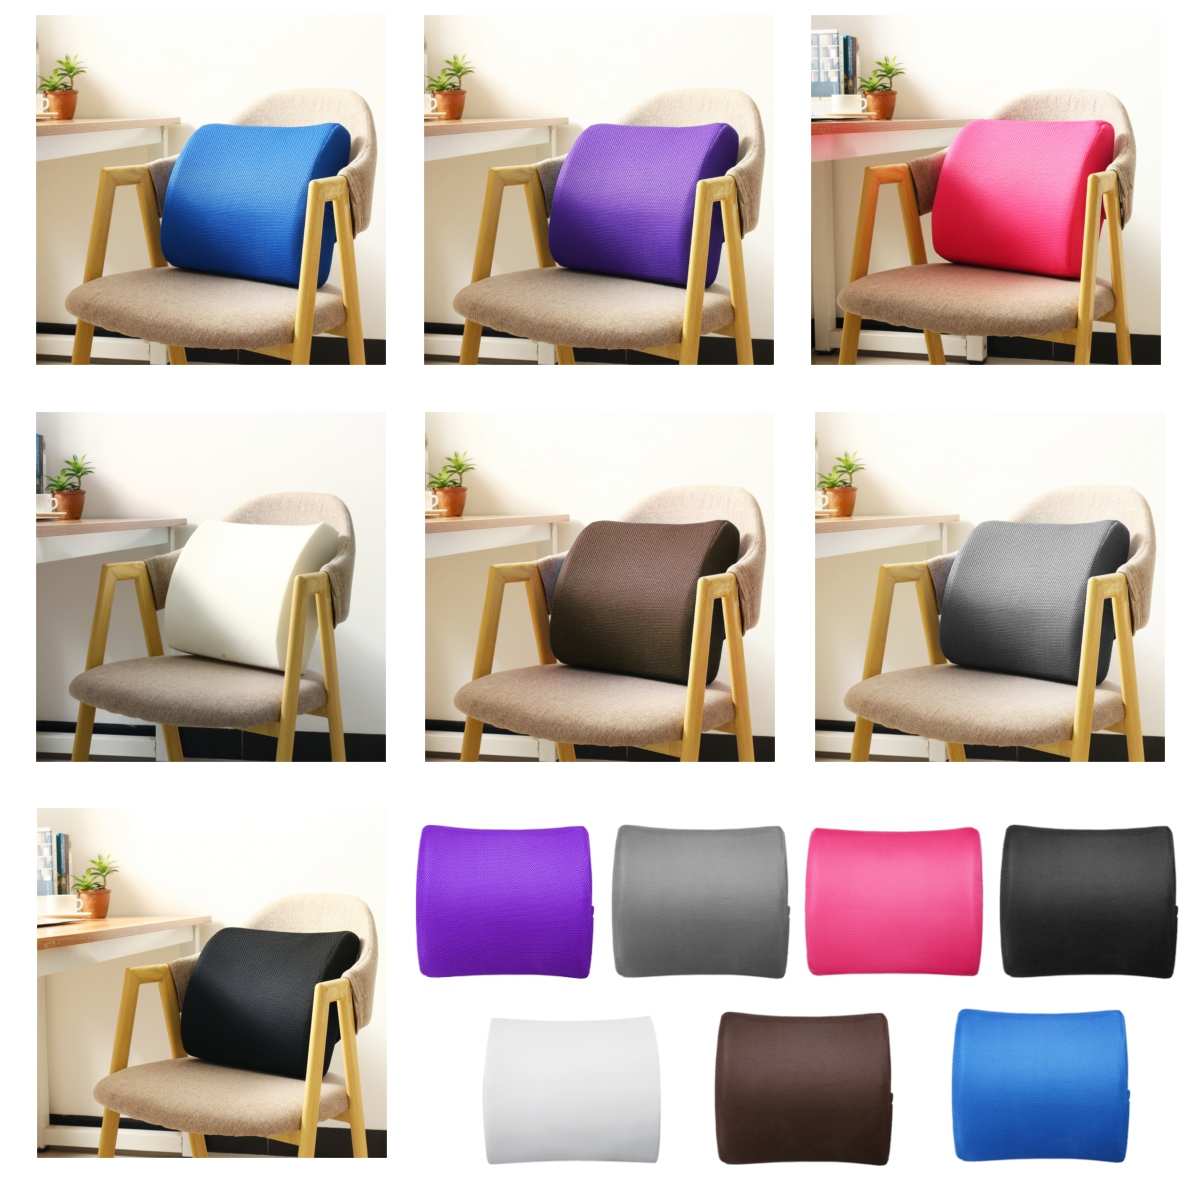 Seat Support Pillow for Back Pain